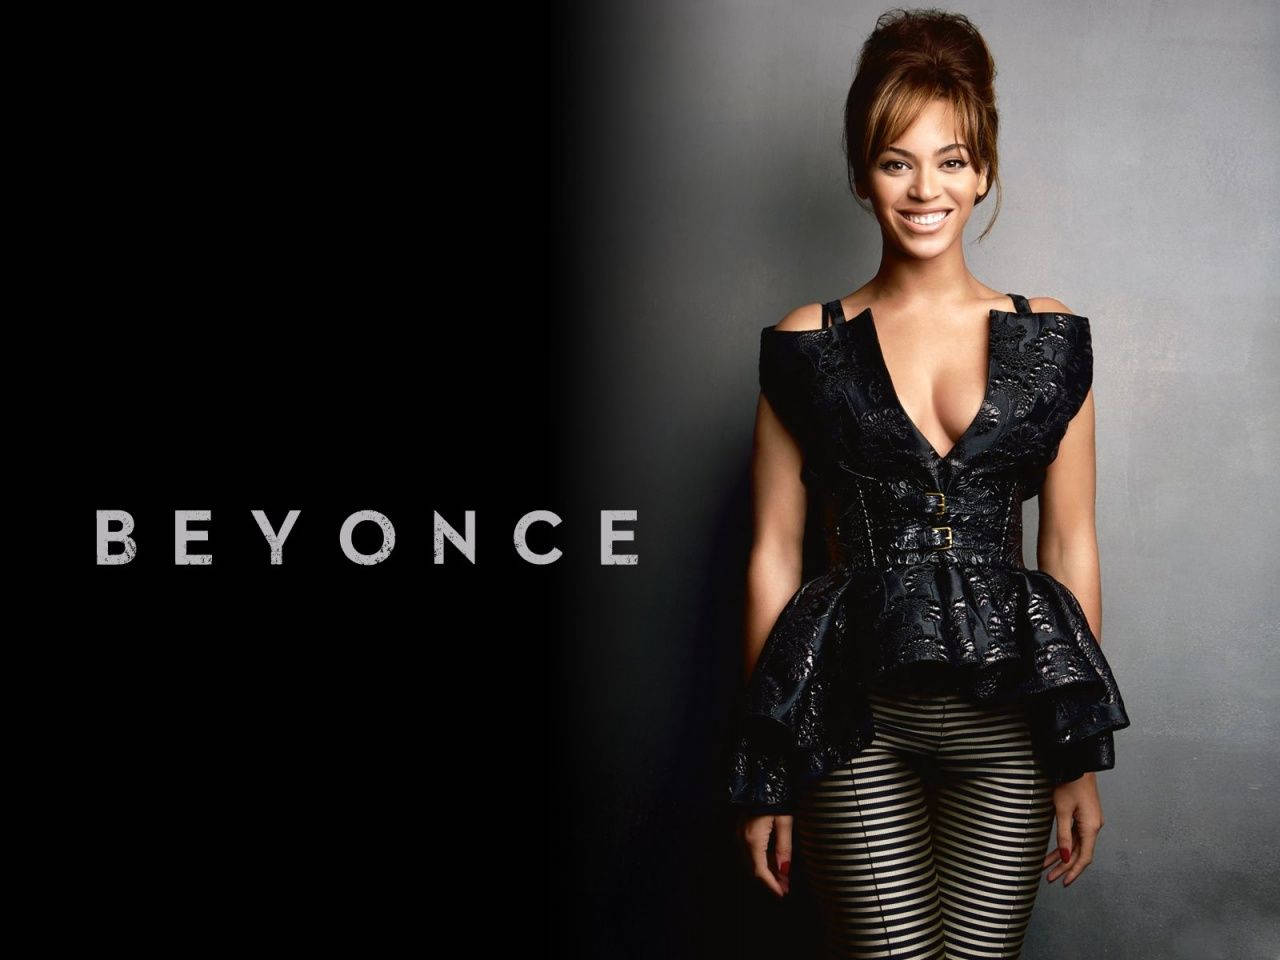 Cheerful Beyonce In Black Outfit Wallpaper